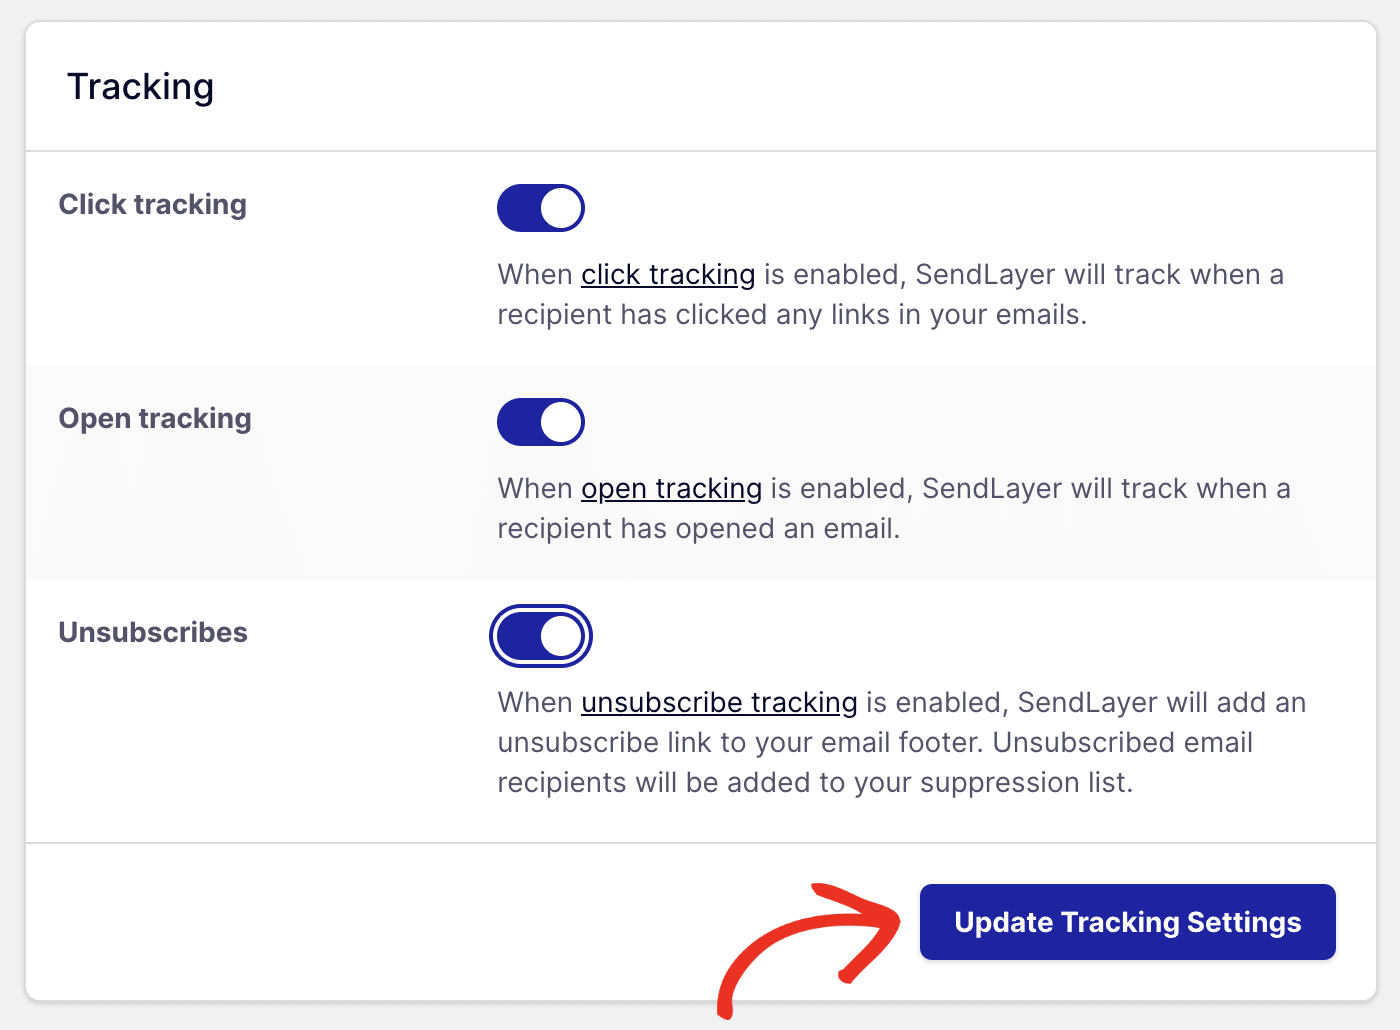 Updating tracking settings